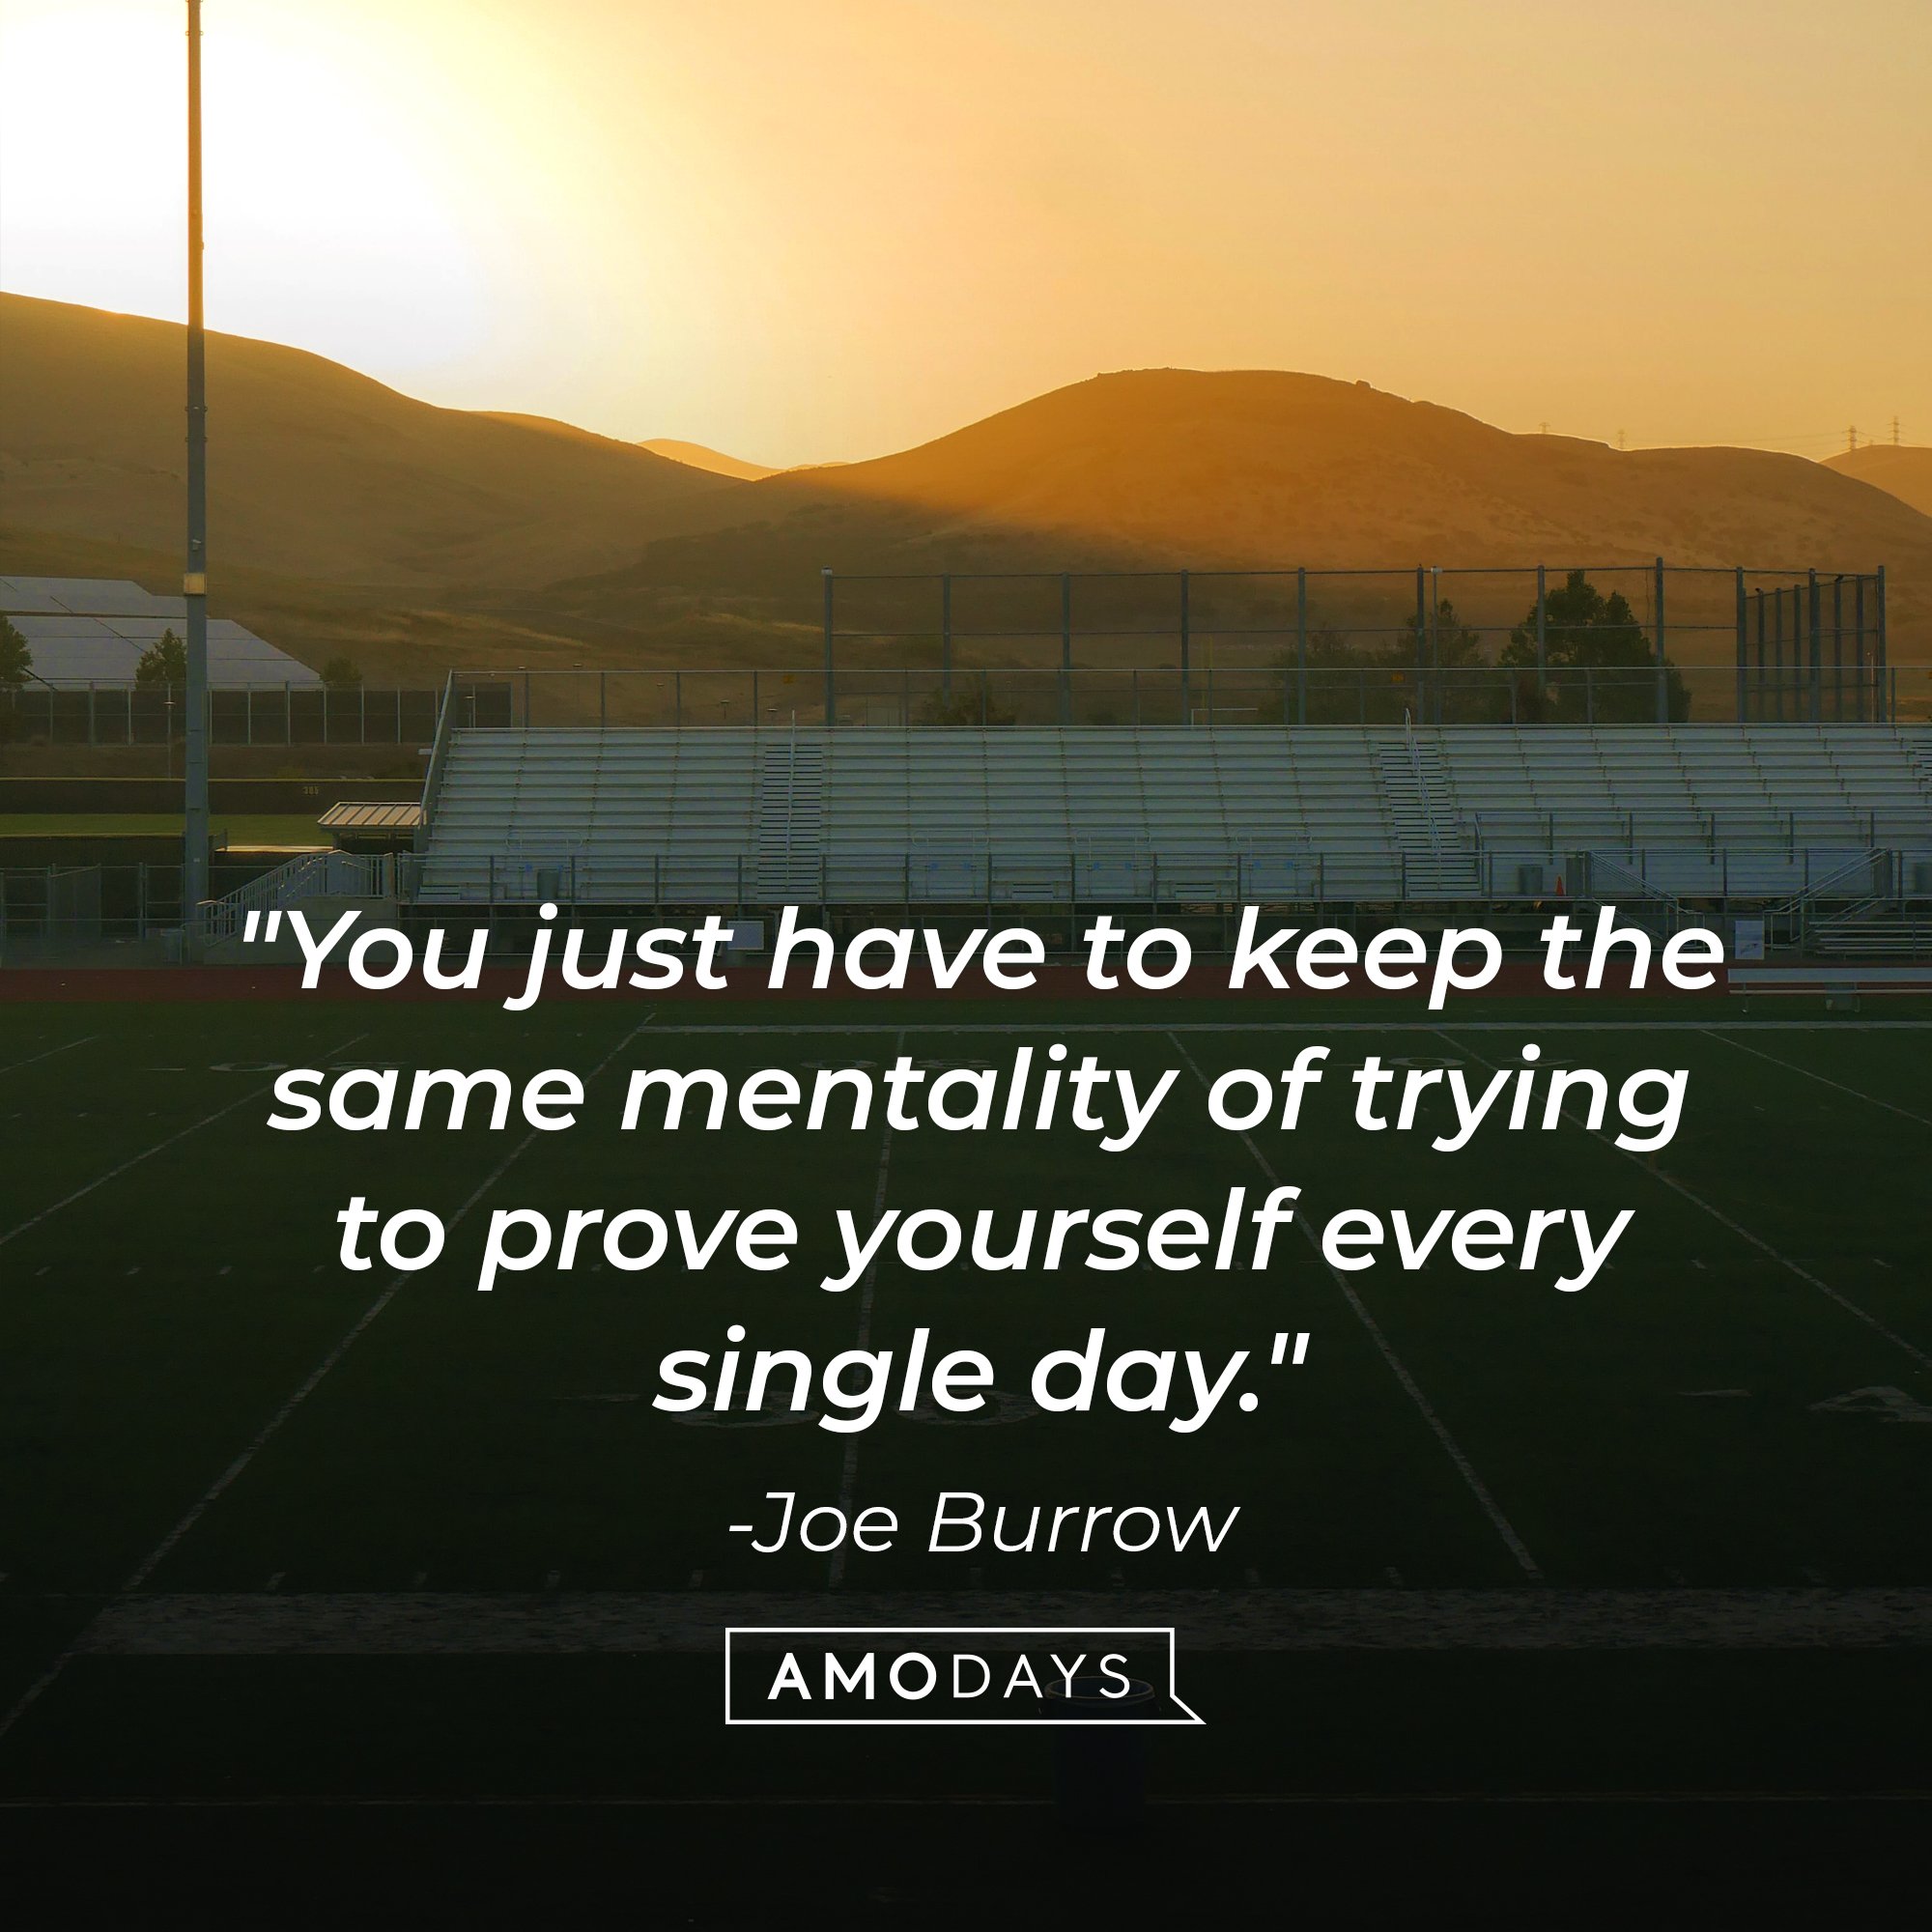  Joe Burrow's quote: "You just have to keep the same mentality of trying to prove yourself every single day." | Image: AmoDays